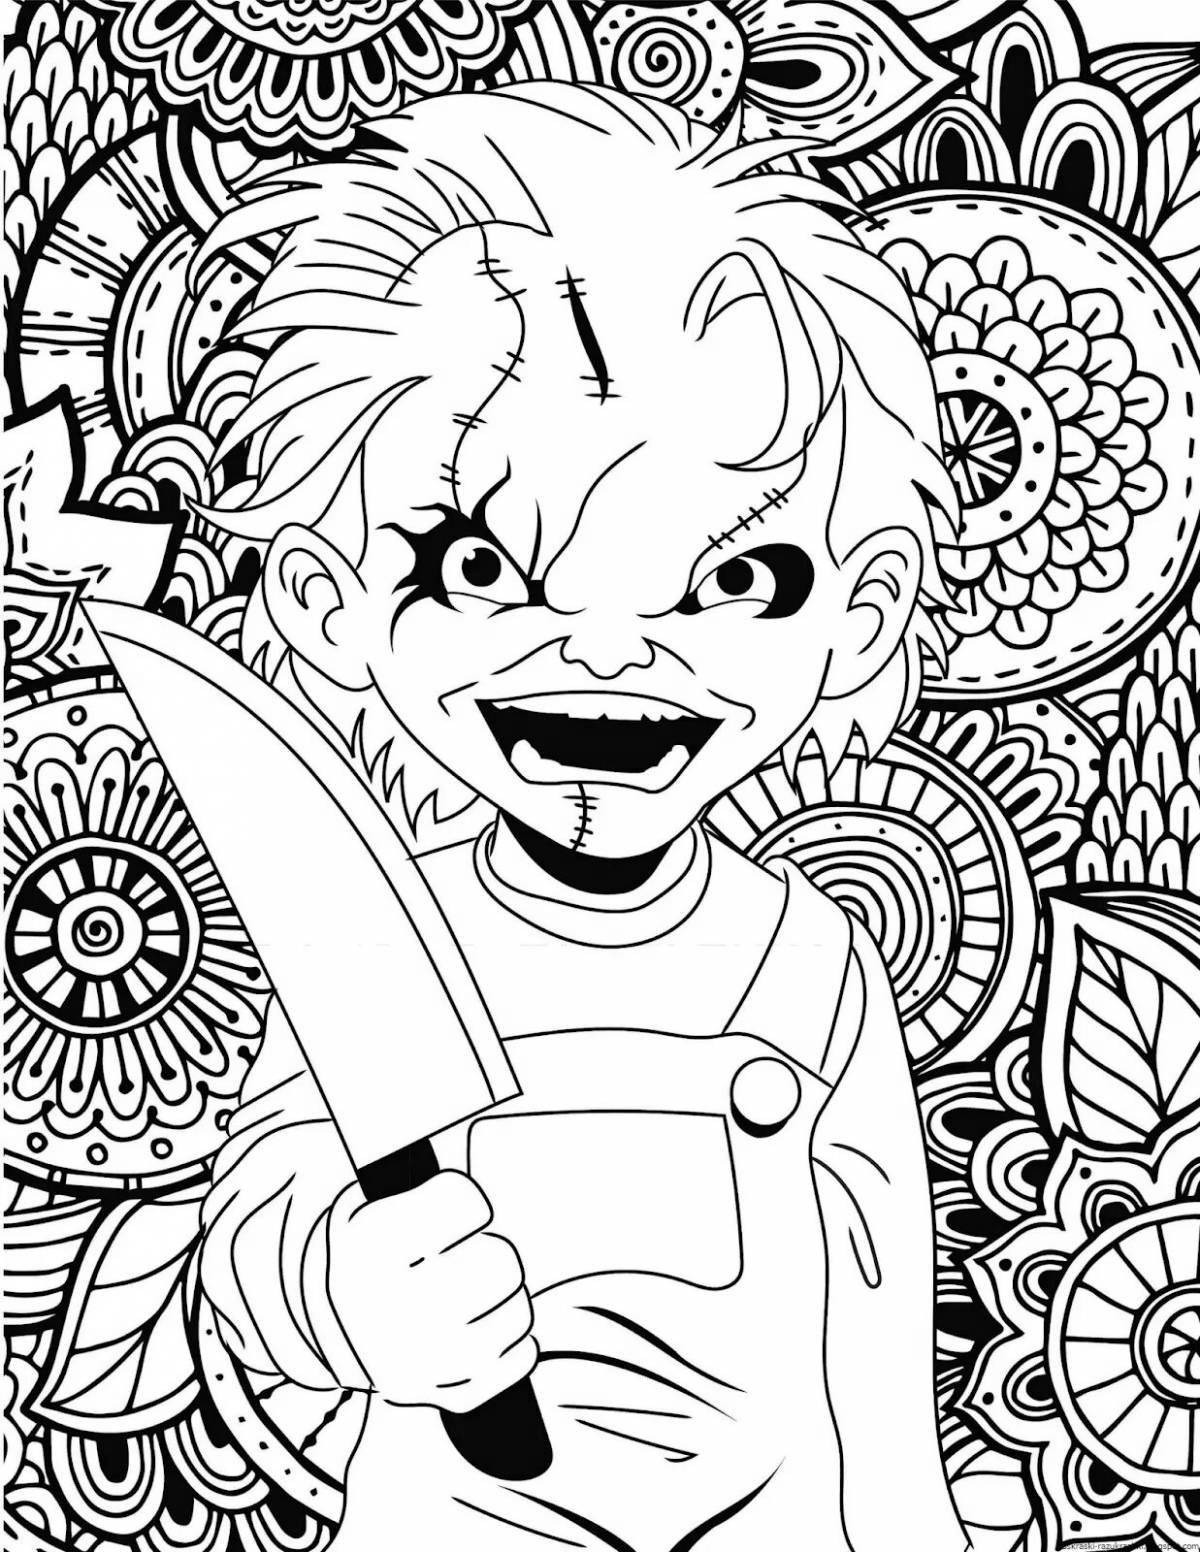 Colorific coloring page for 13 years cool for boys